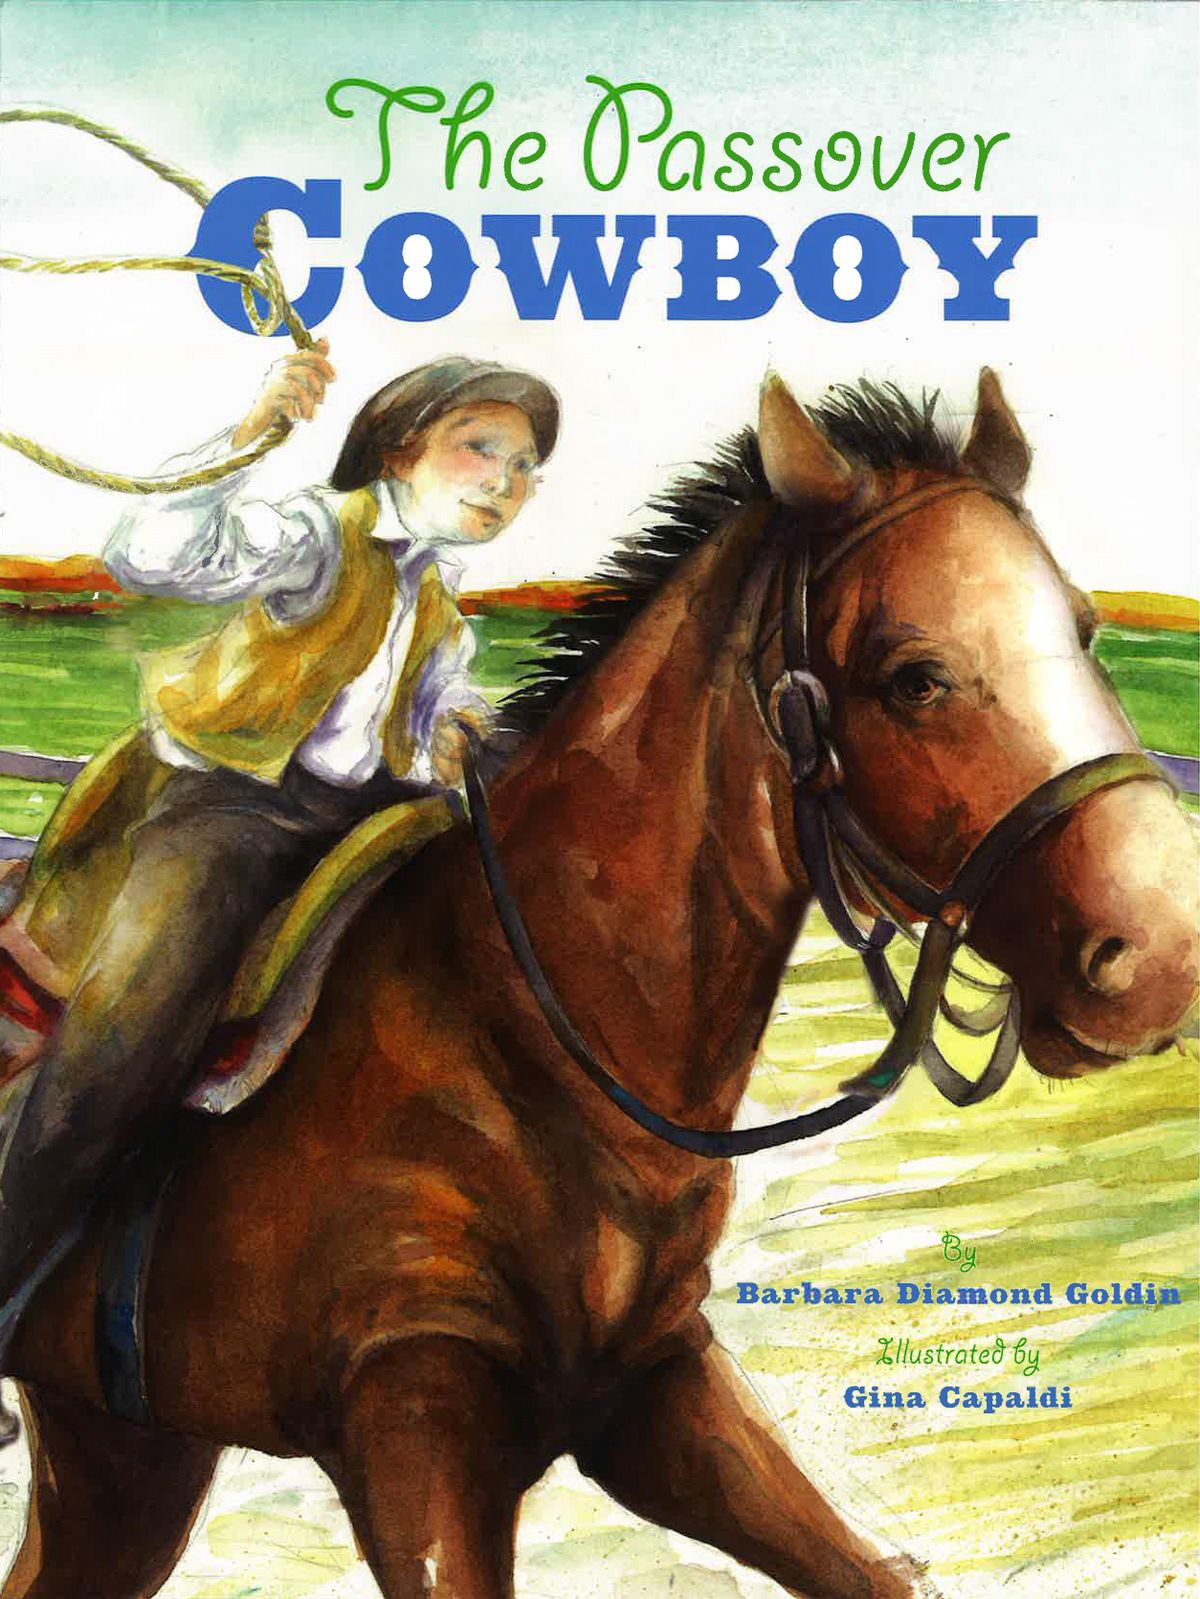 Lush watercolor illustrations of the characters and Argentine landscape give vibrancy to “The Passover Cowboy,” a well-paced story of tradition, family and friendship punctuated with humor and warmth. (Apples and Honey Press / Apples and Honey Press)